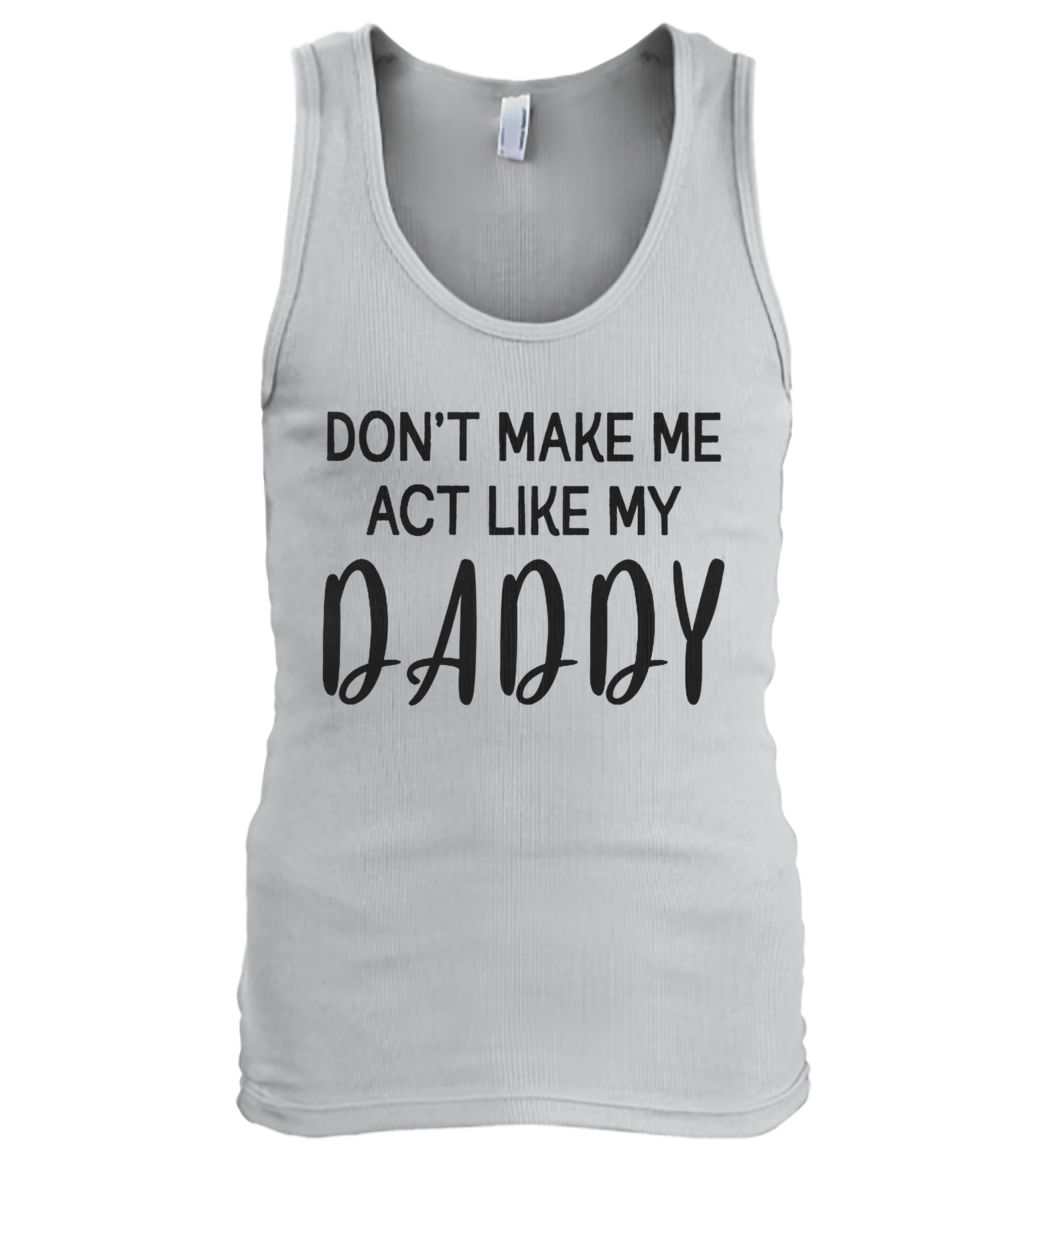 Don't make me act like my daddy men's tank top